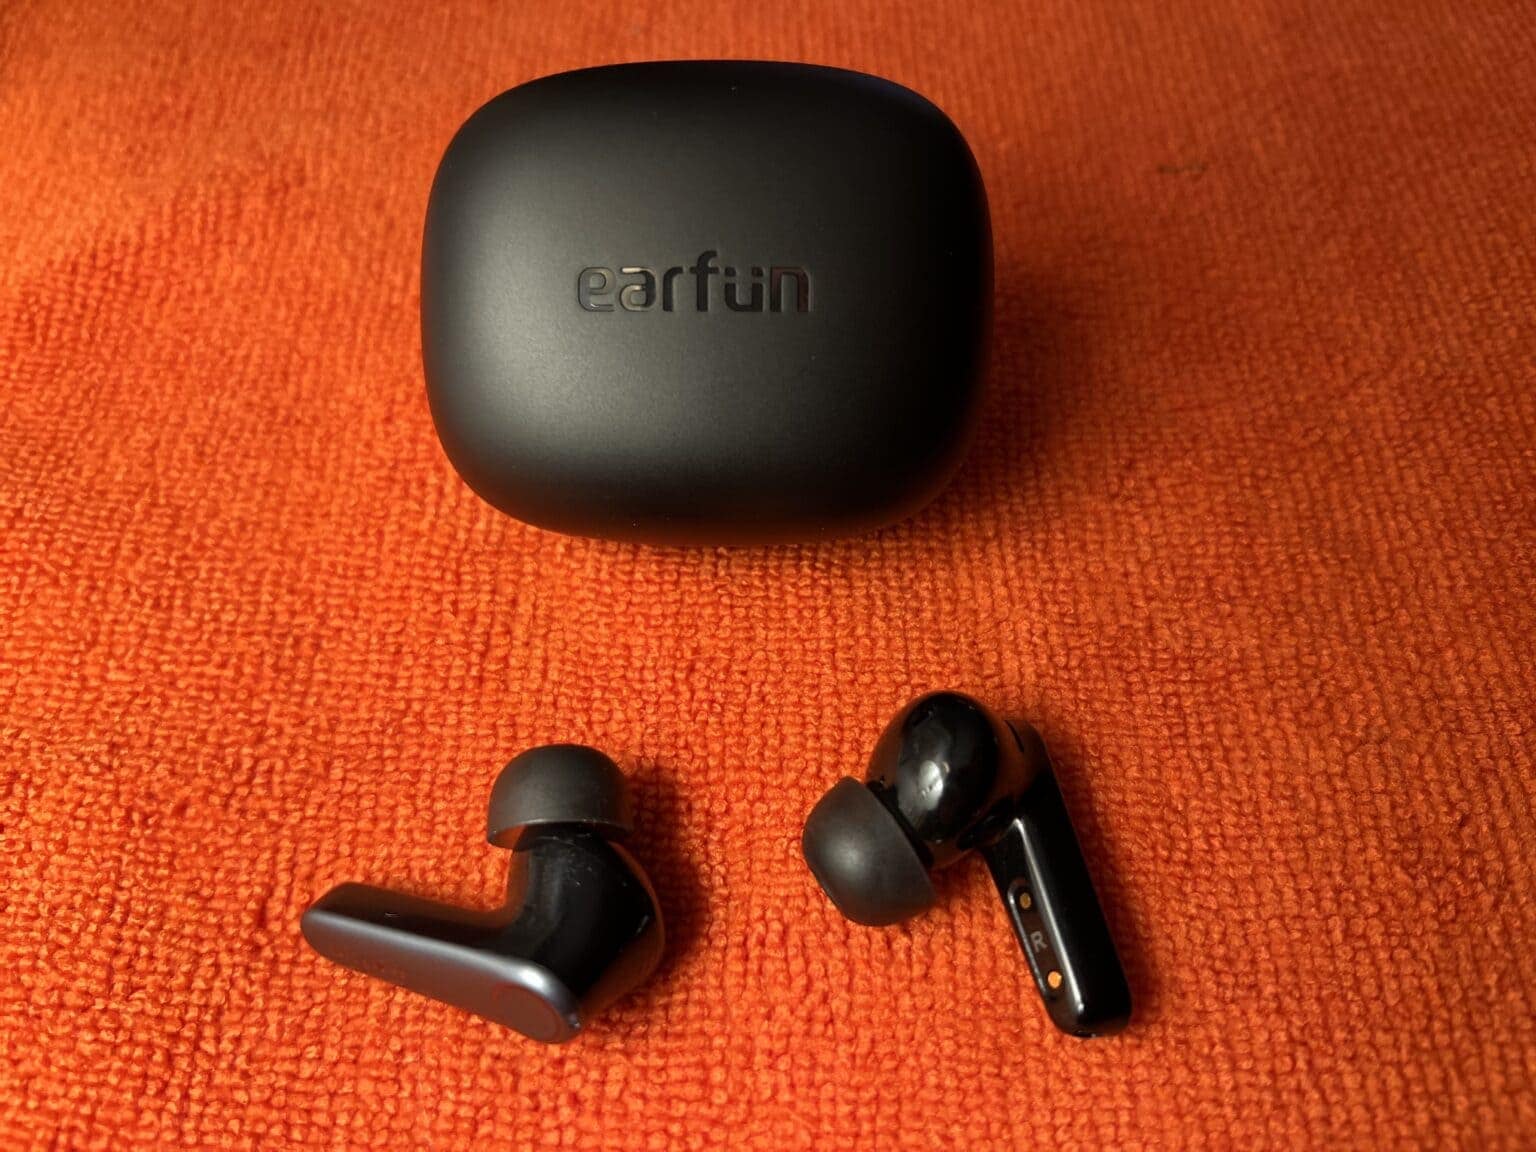 EarFun Air Pro 3 noise-cancelling earbuds for around $50 is a great deal.